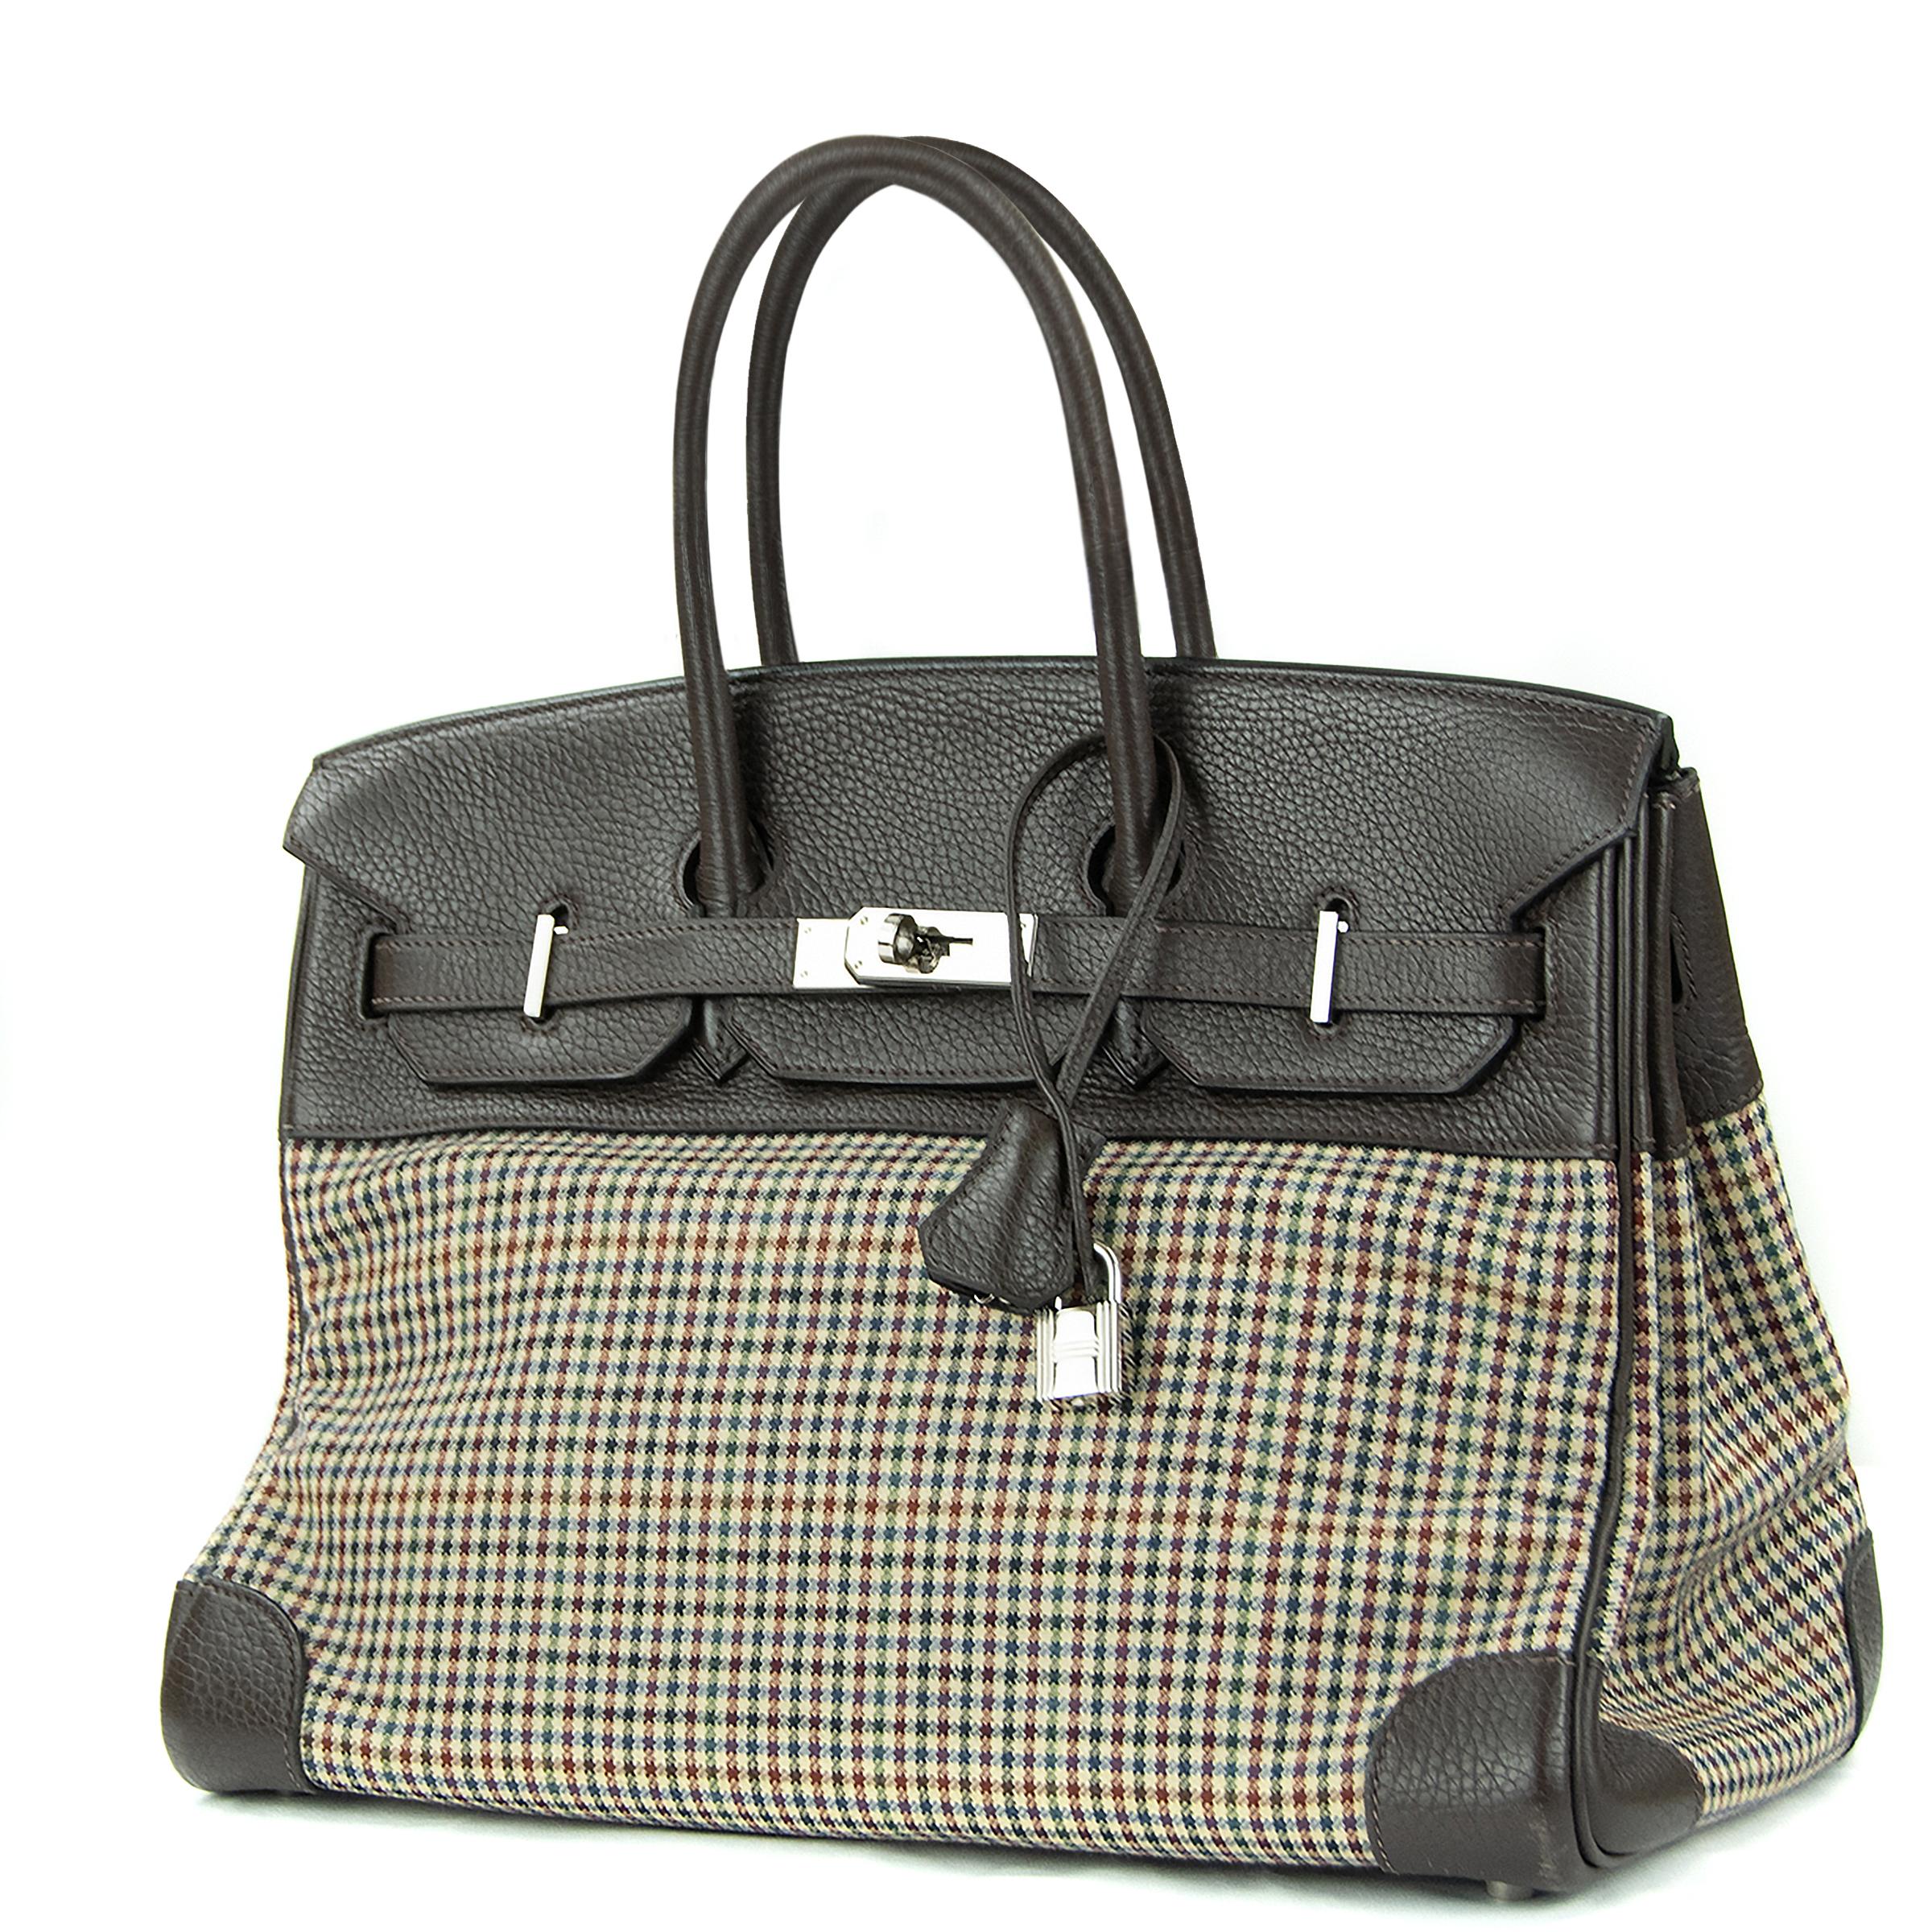 Hermes 30cm Birkin bag in Togo & Plaid Wool Lainage. This iconic special order Hermes Birkin bag is timeless and chic. Fresh and crisp with palladium hardware.

    Condition: New or Never Used
    Made in France
    Bag Measures: 30cm (11.8